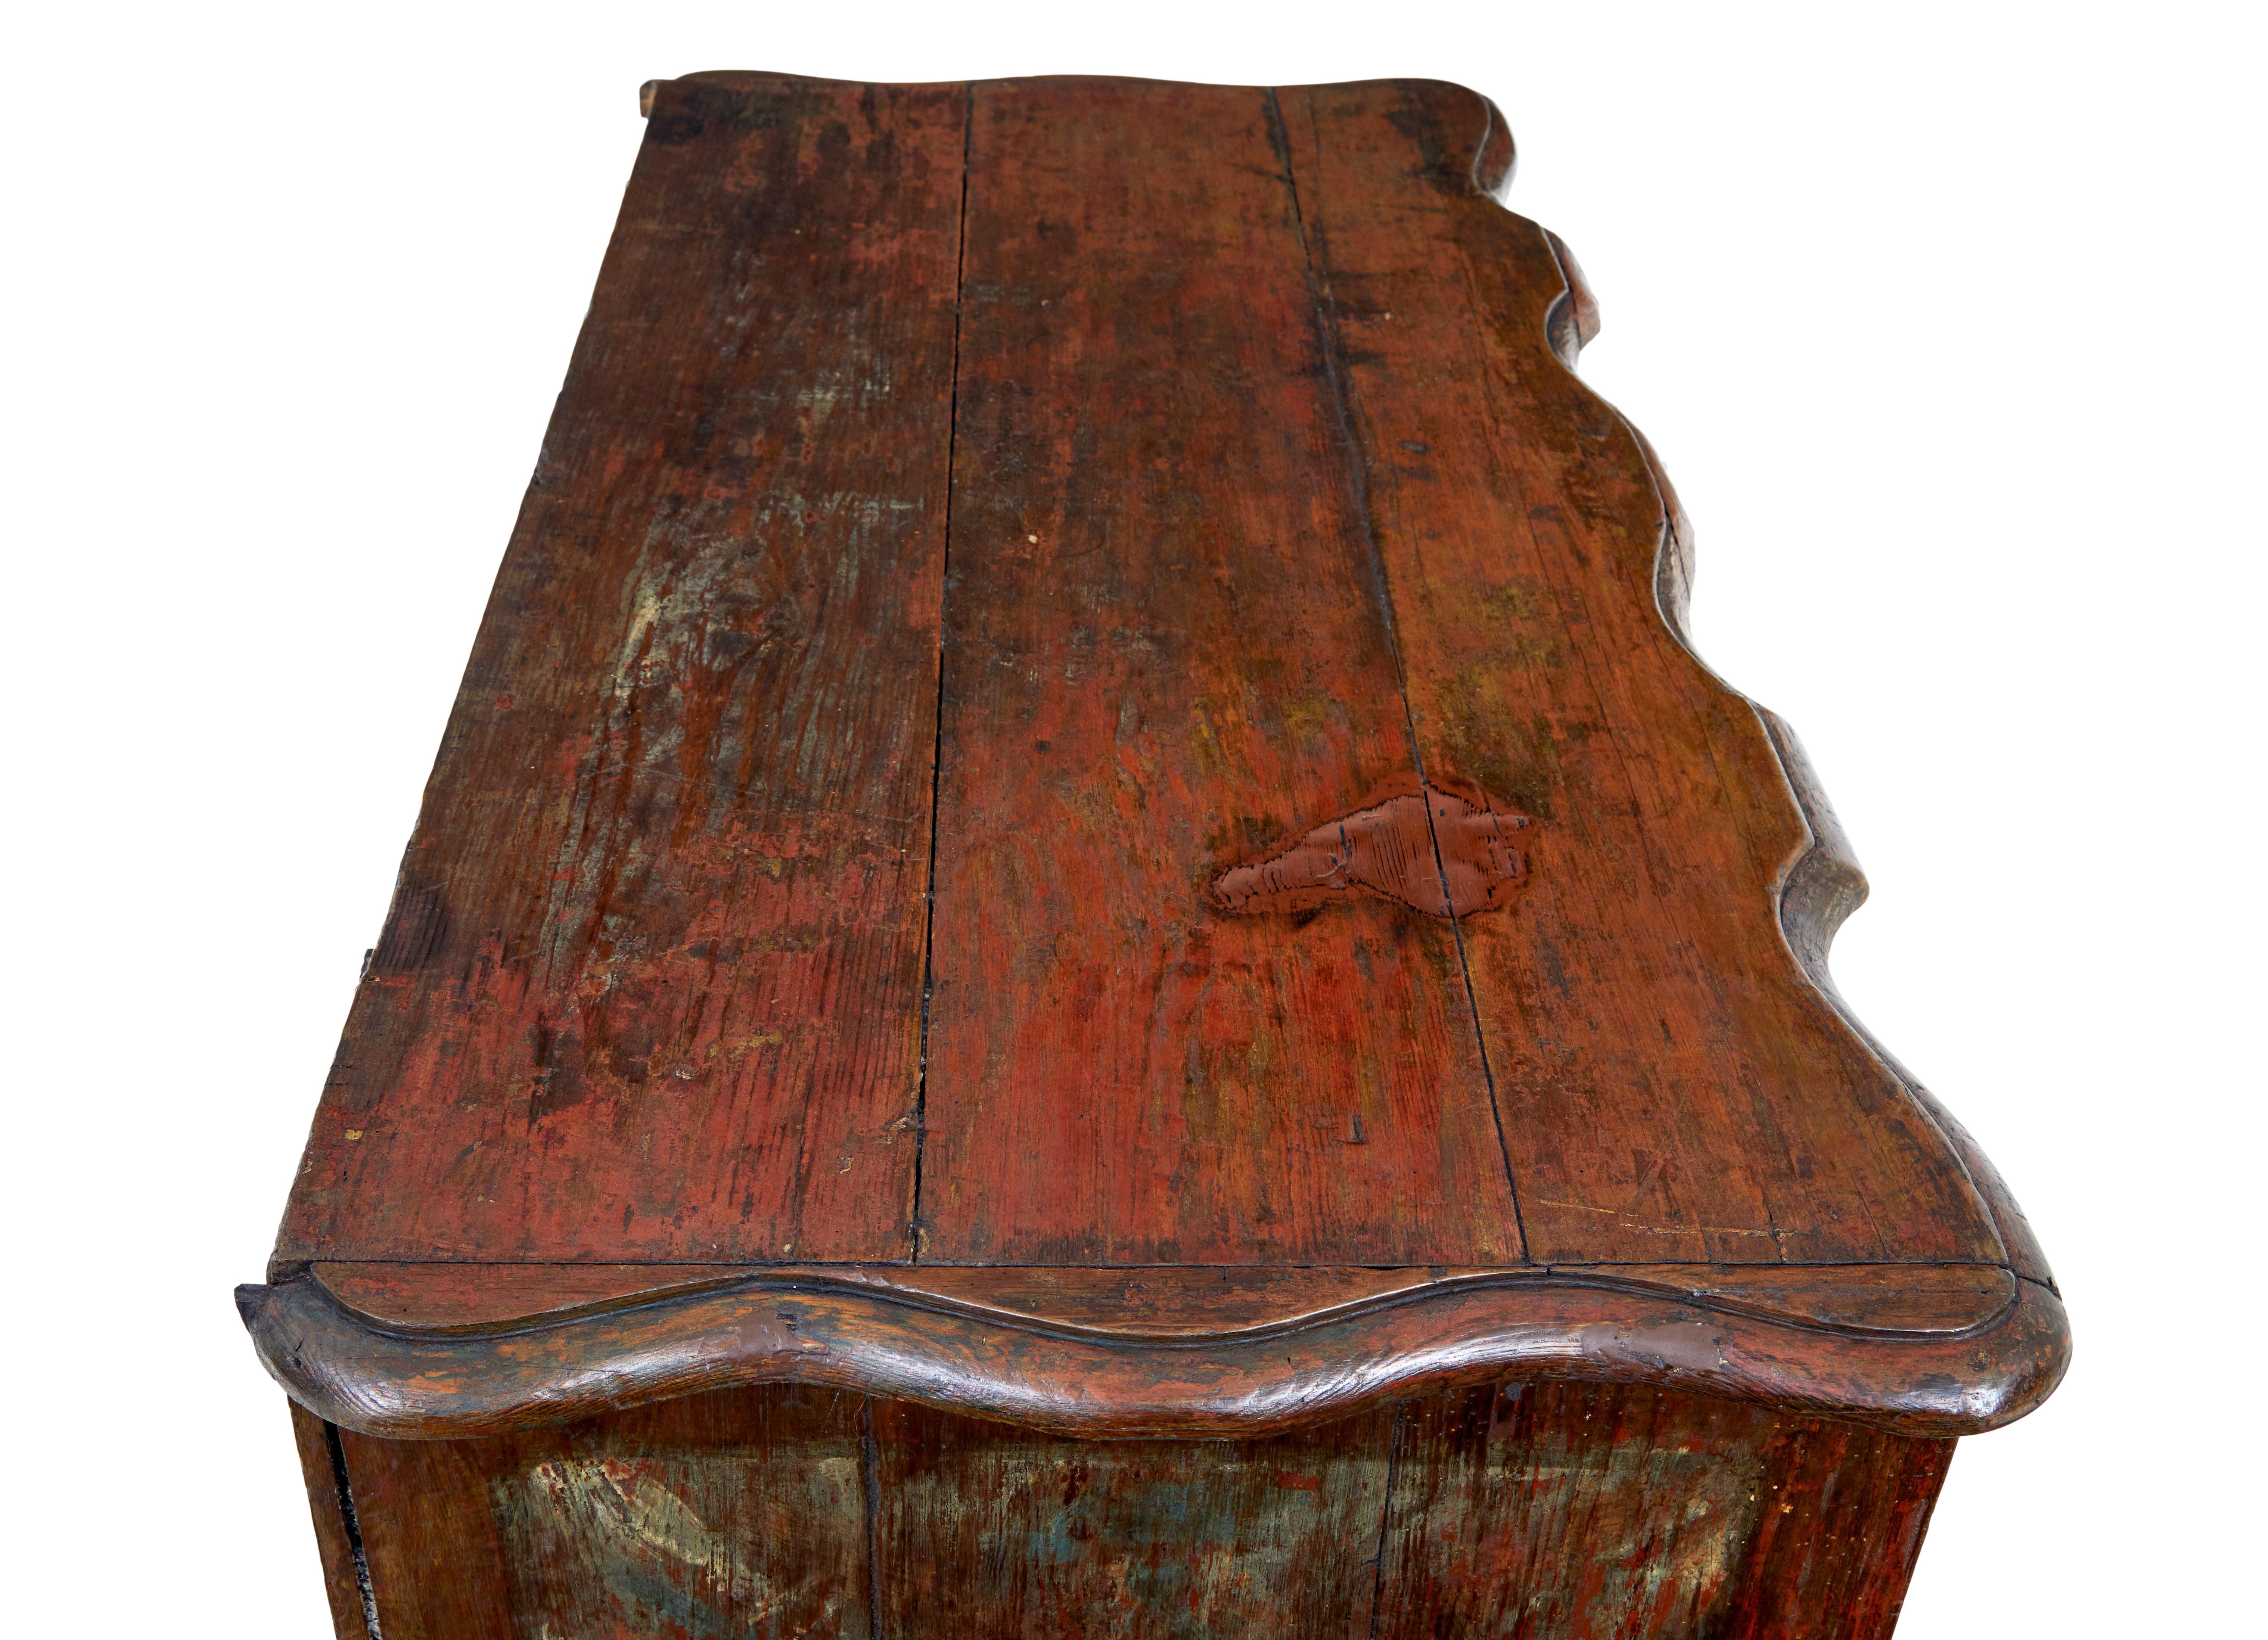 Rare danish commode with traces of original paint circa 1750.

2 part chest, made this way because of its generous proportions.

Beautiful scalloped shaped top and drawer fronts.  4 drawers which open on the key.  Traces of original paint which